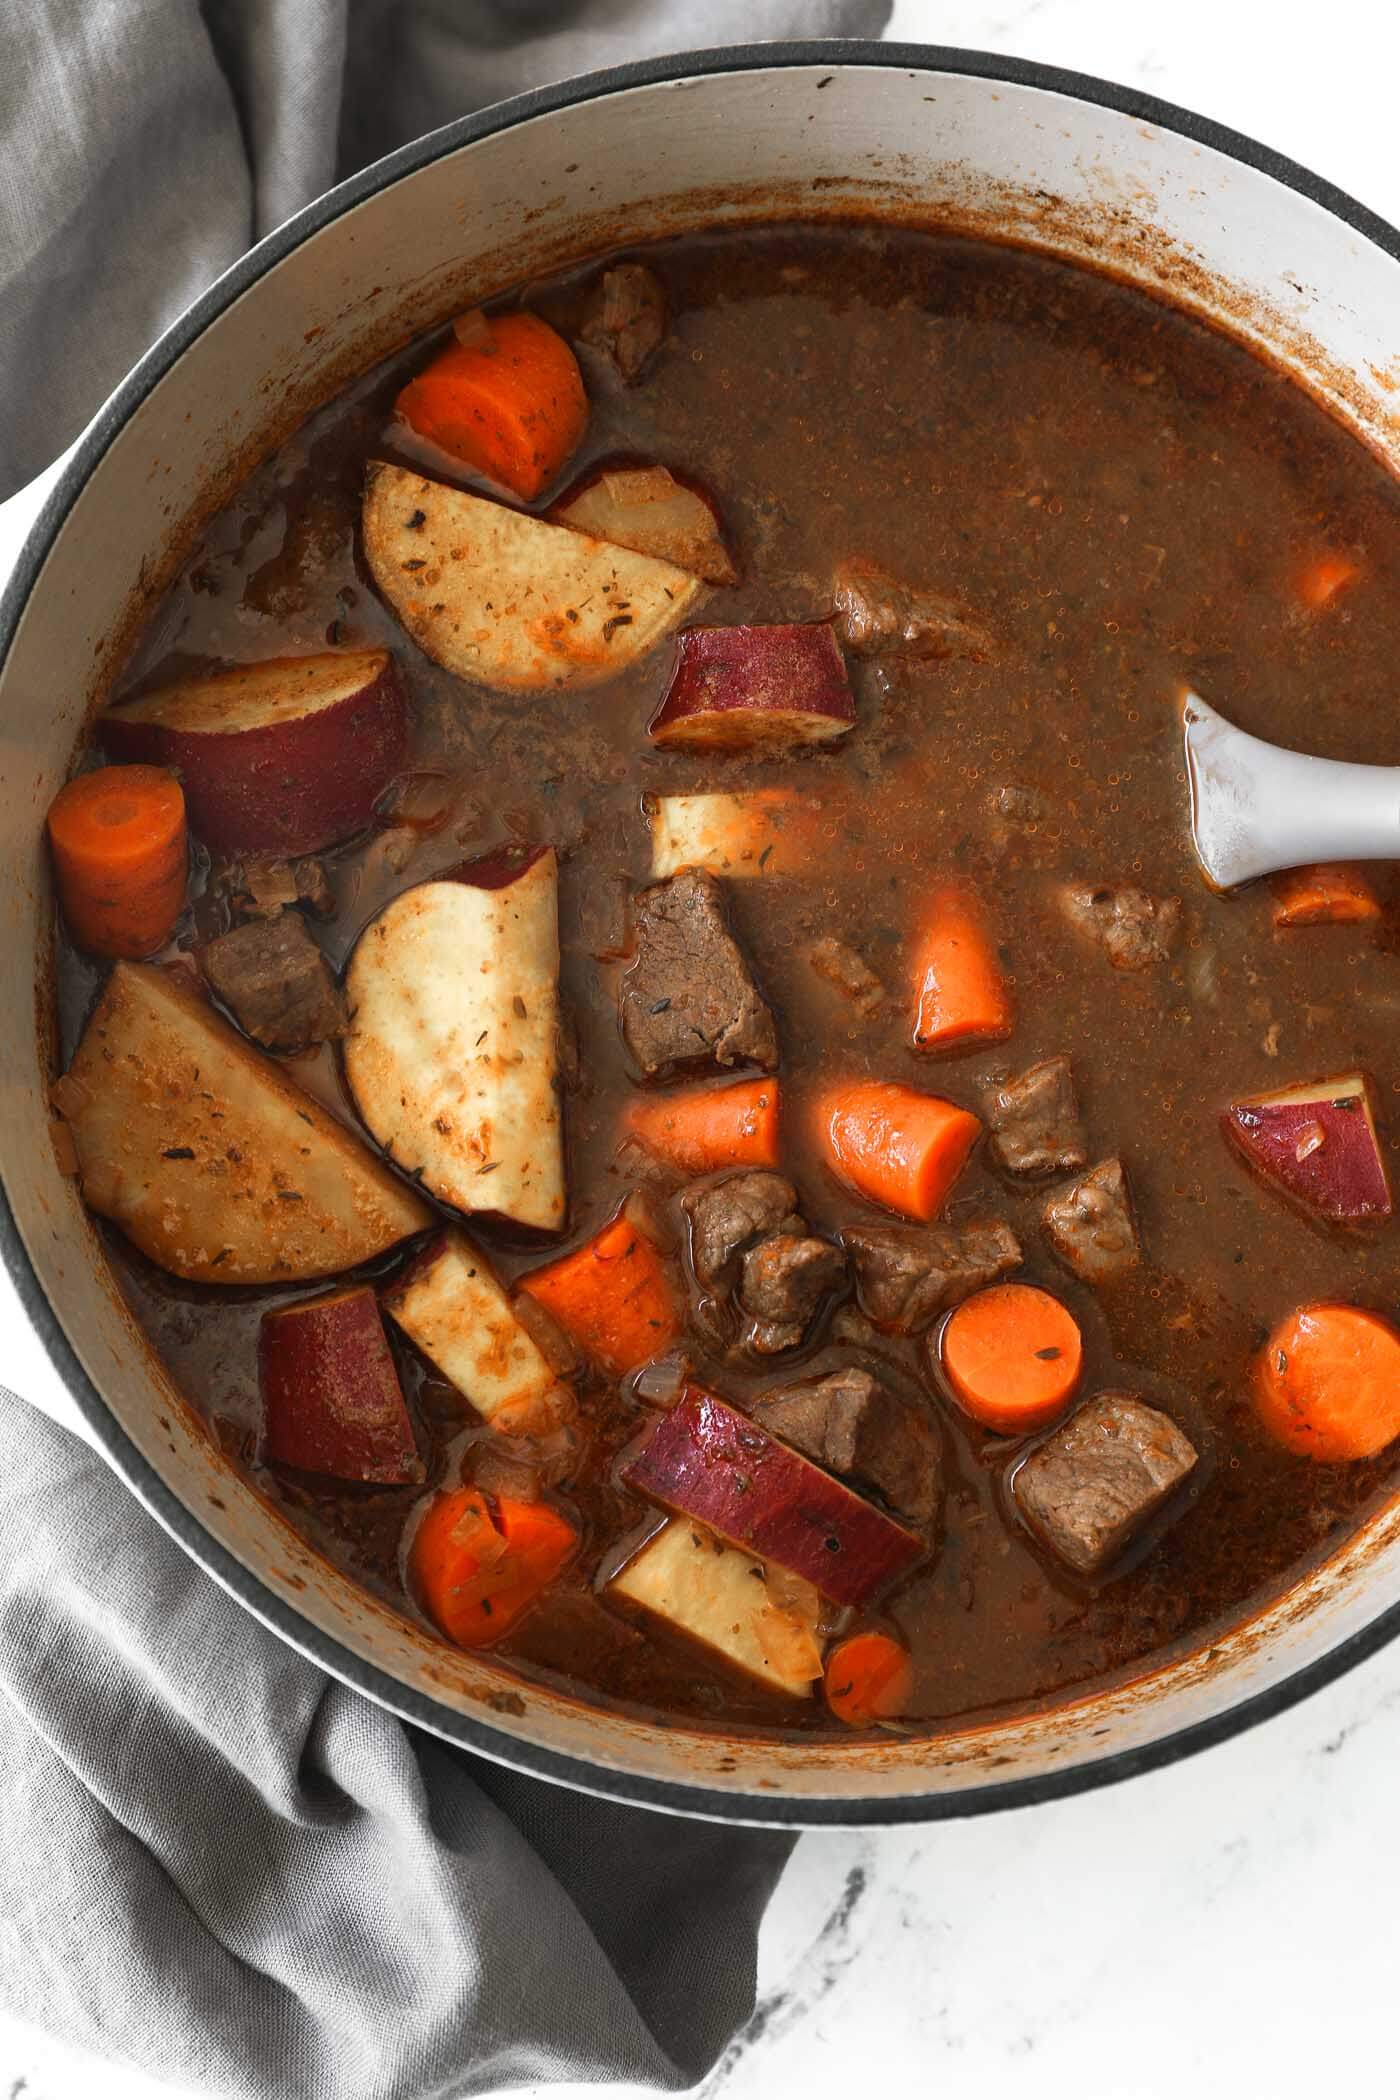 https://realsimplegood.com/wp-content/uploads/Classic-Old-Fashioned-Dutch-Oven-Beef-Stew-19.jpg